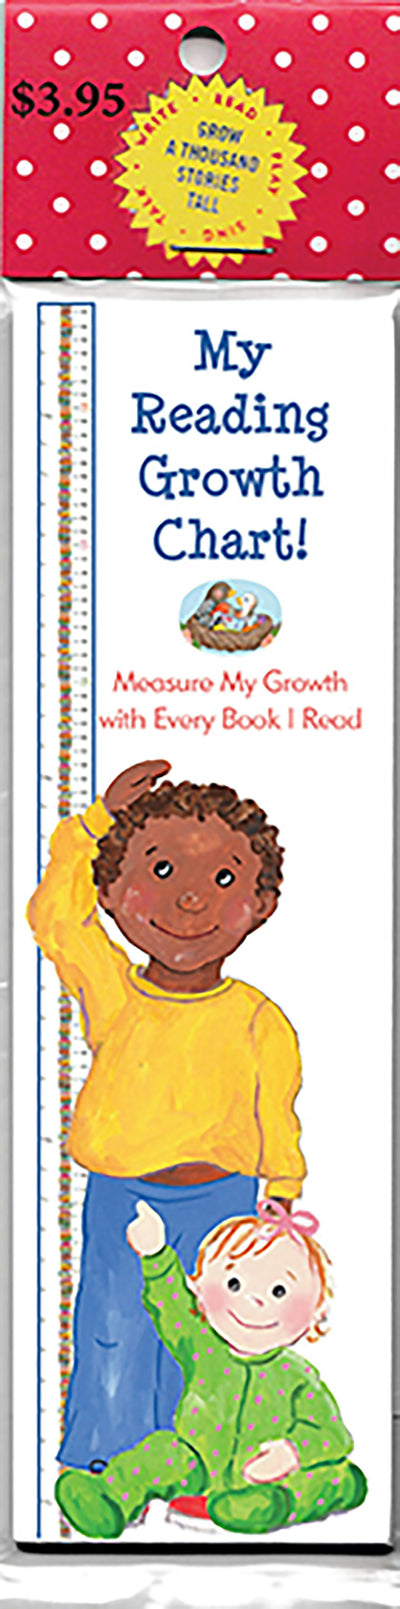 My Reading Growth Chart!